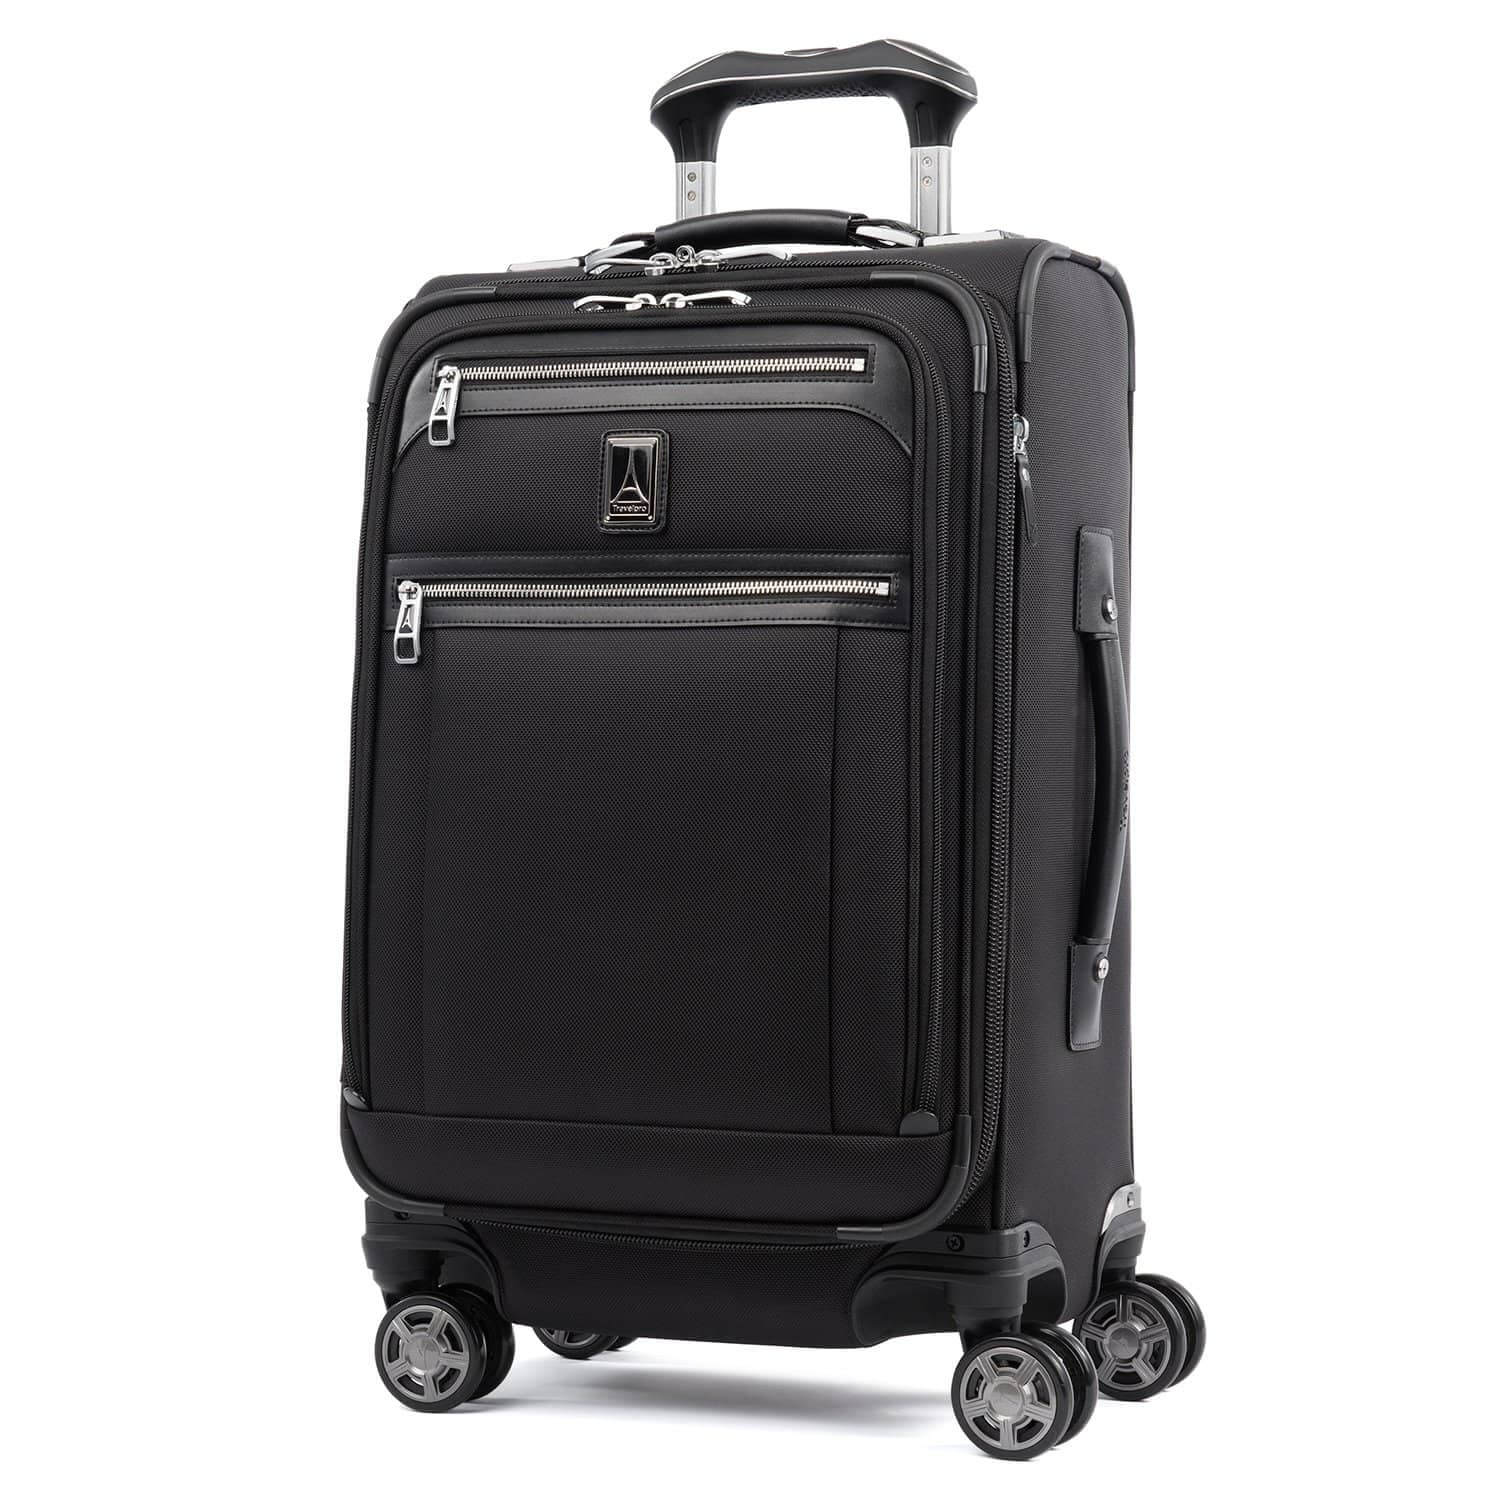 travelpro platinum elite 21 inch carry on suitcase black suitcase silver hardware black travelpro logo carrying handle